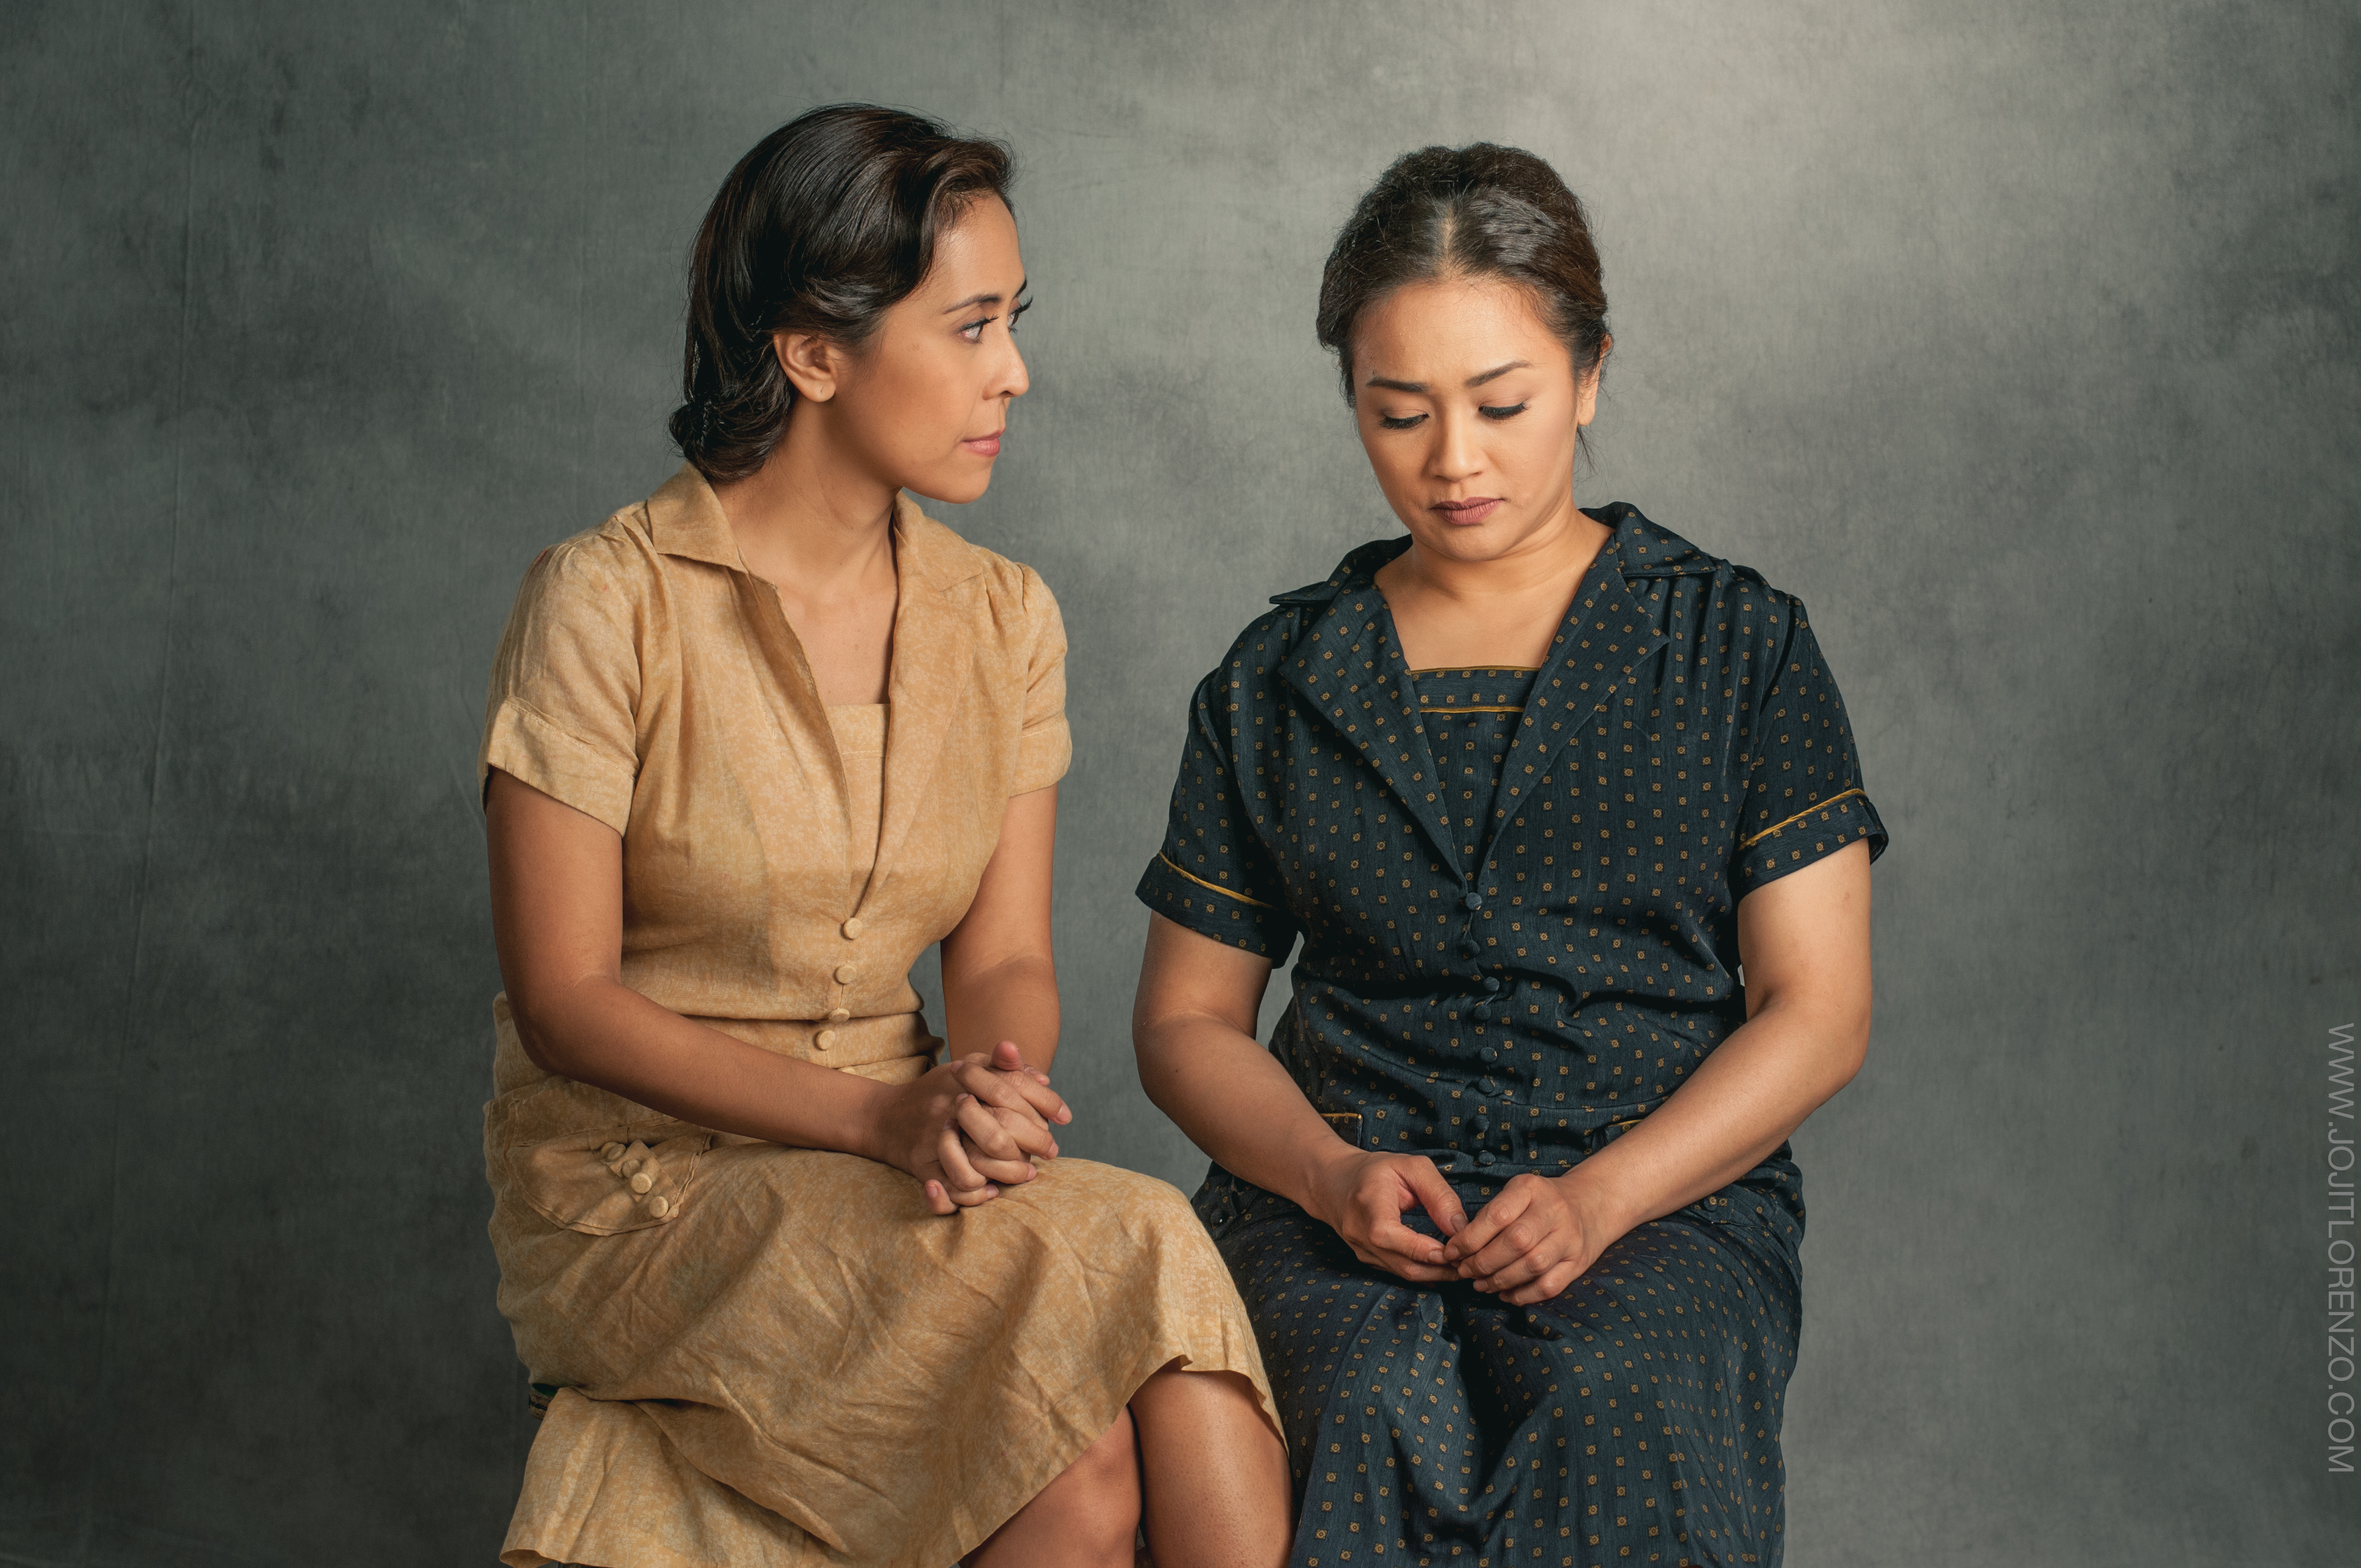 MARASIGAN SISTERS. Joanna Ampil and I as the famed Marasigan sisters of Nick Joaquin's Portrait of the Artist as Filipino now on film as Ang Larawan. Photo by Jojit Lorenzo  